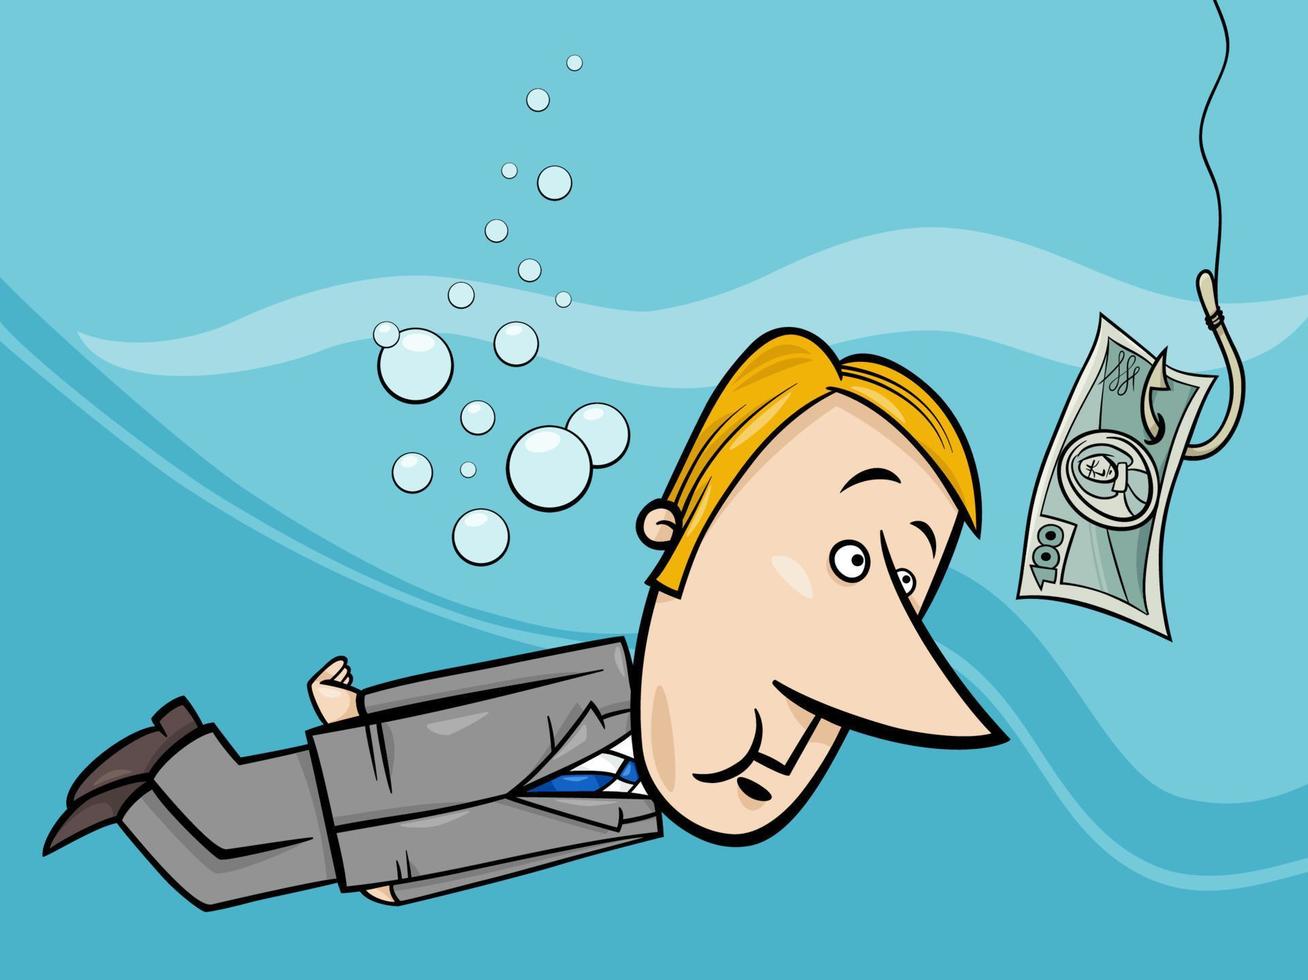 https://static.vecteezy.com/system/resources/previews/009/885/894/non_2x/cartoon-businessman-underwater-and-banknote-as-a-fish-bait-vector.jpg